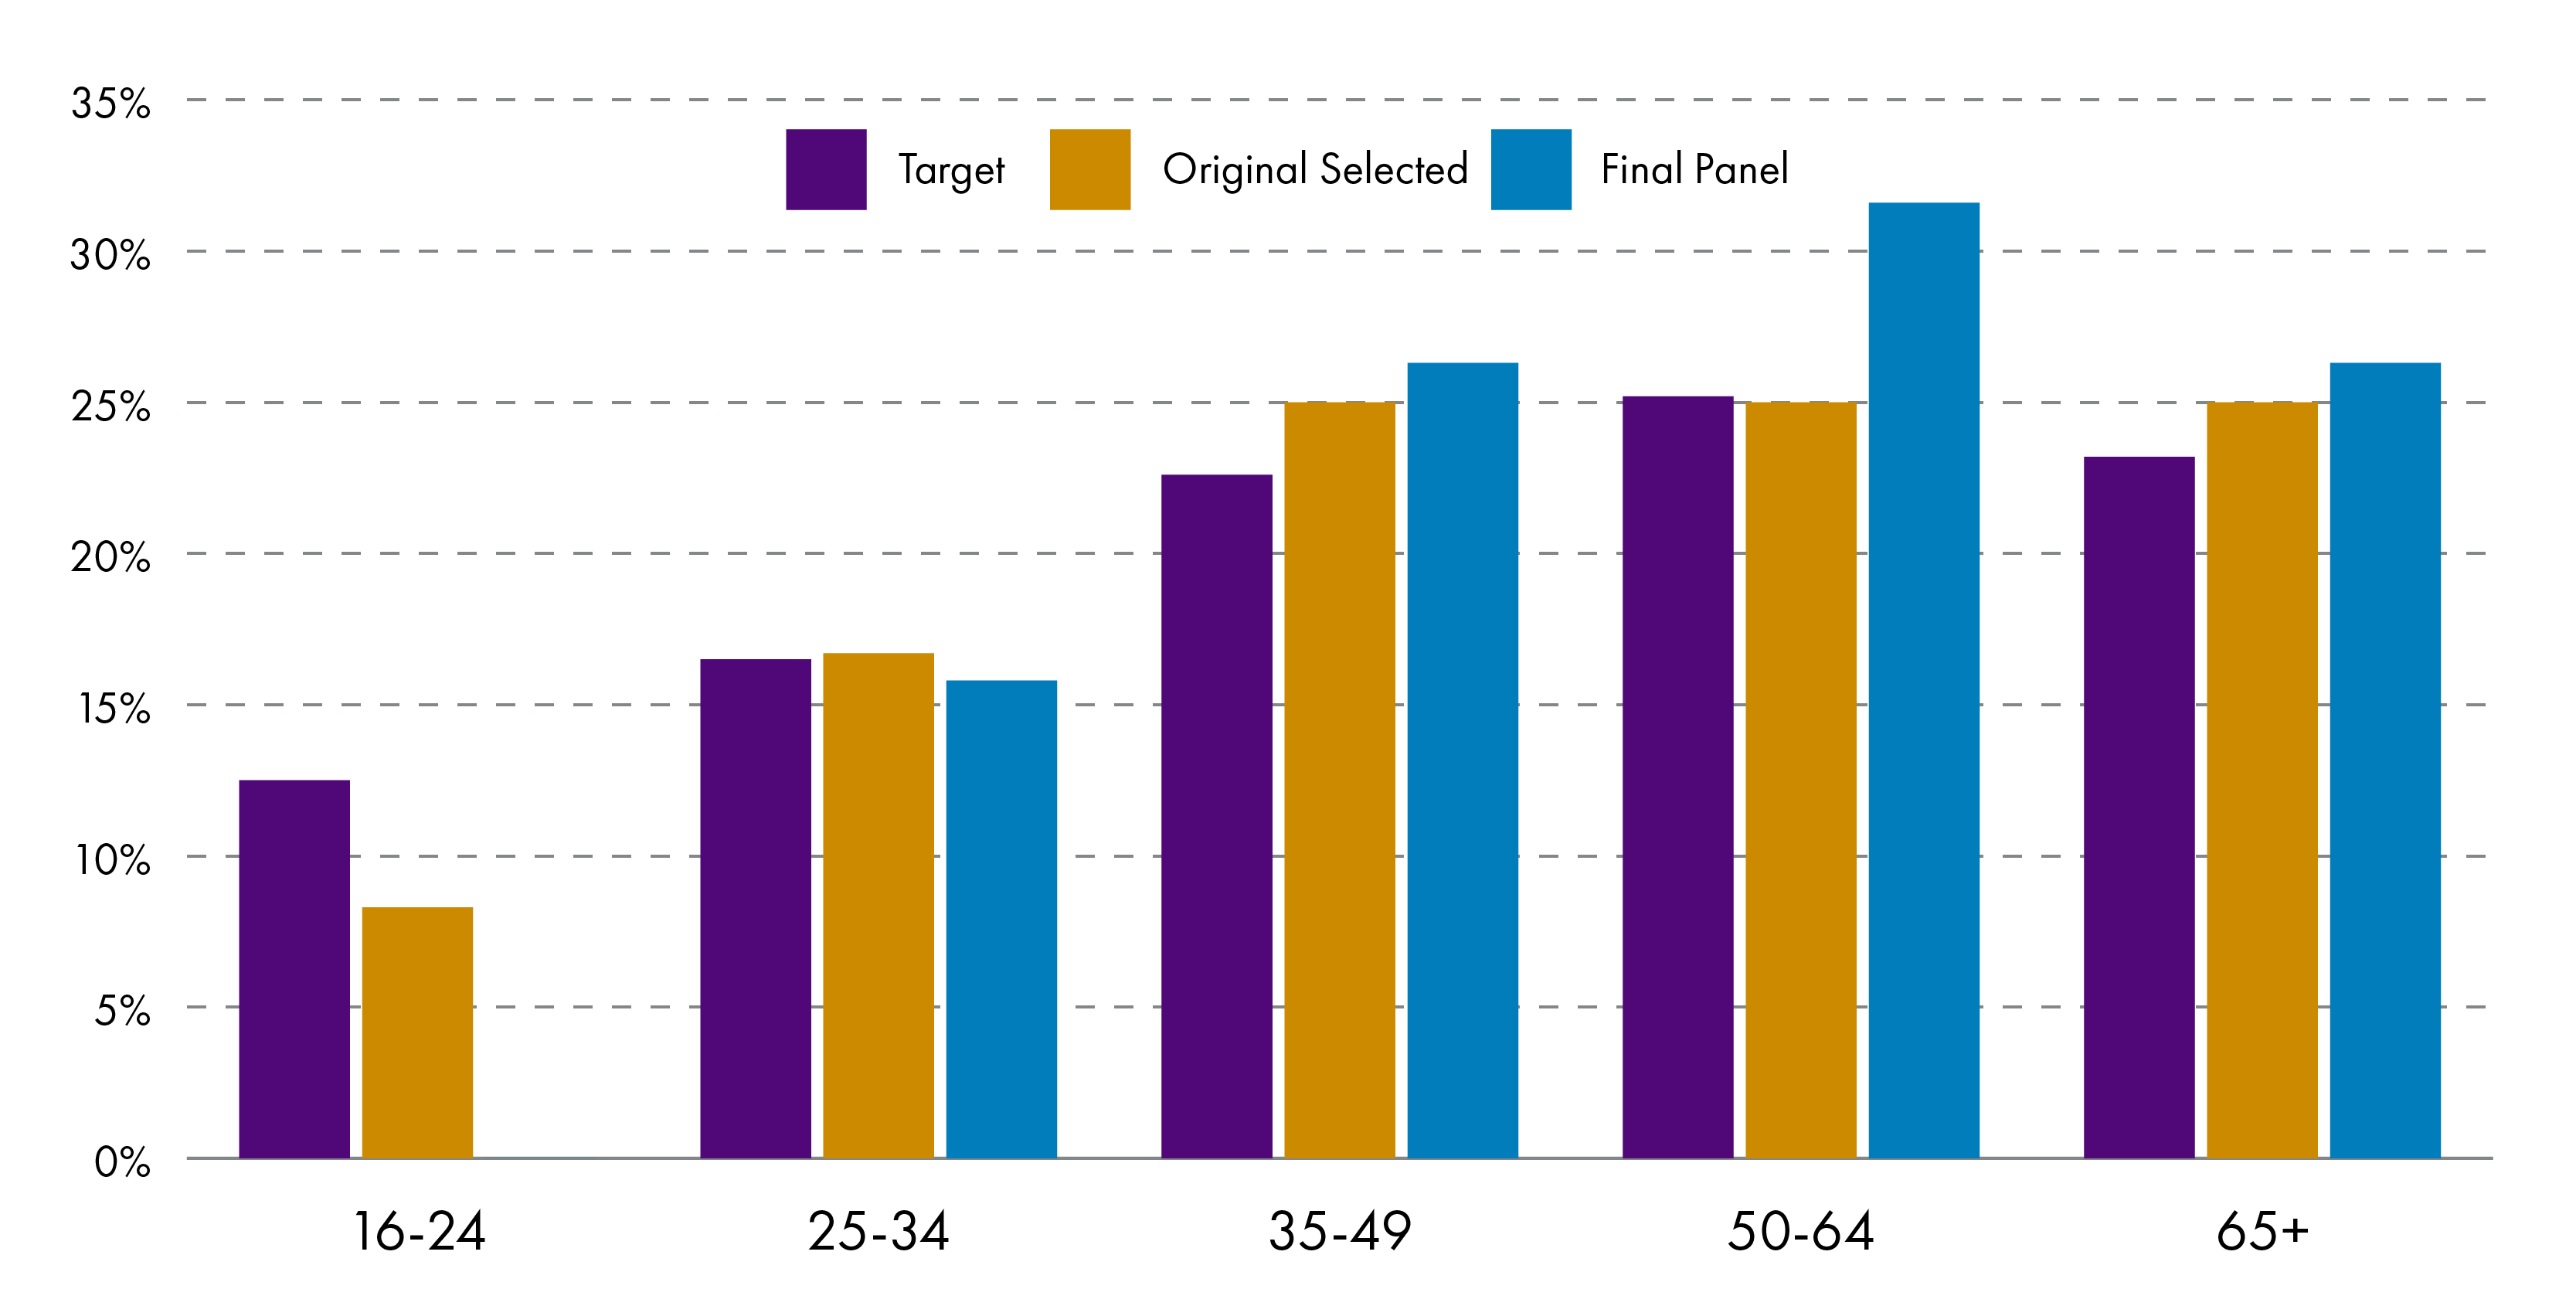 Bar chart showing the proportion of participants at each stage of the process by age group.